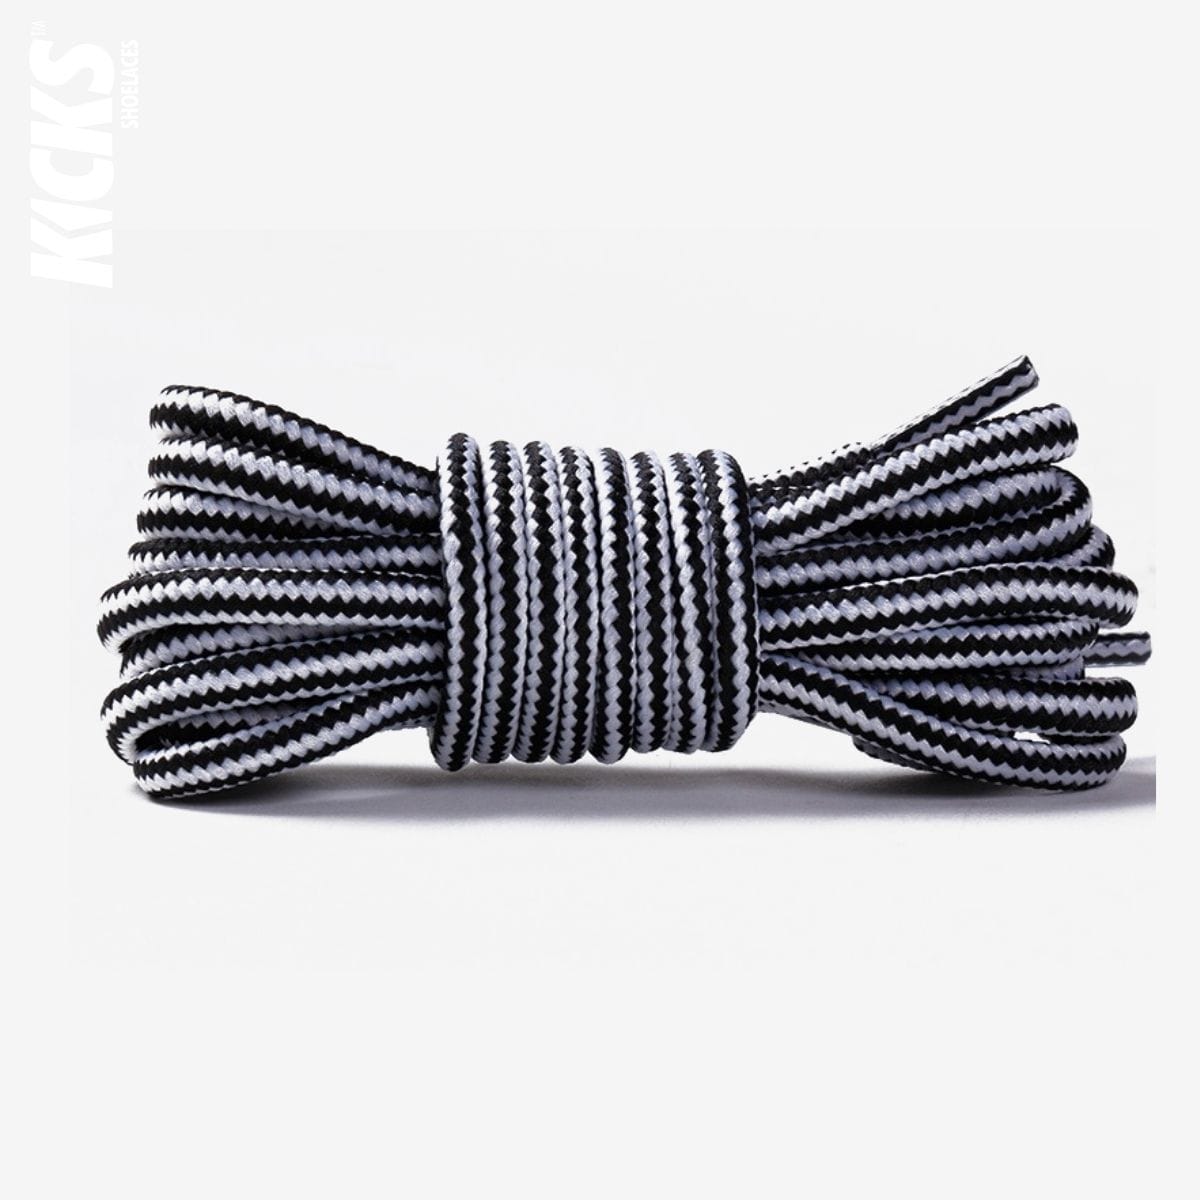 striped-two-color-shoelaces-for-casual-shoes-in-black-and-white